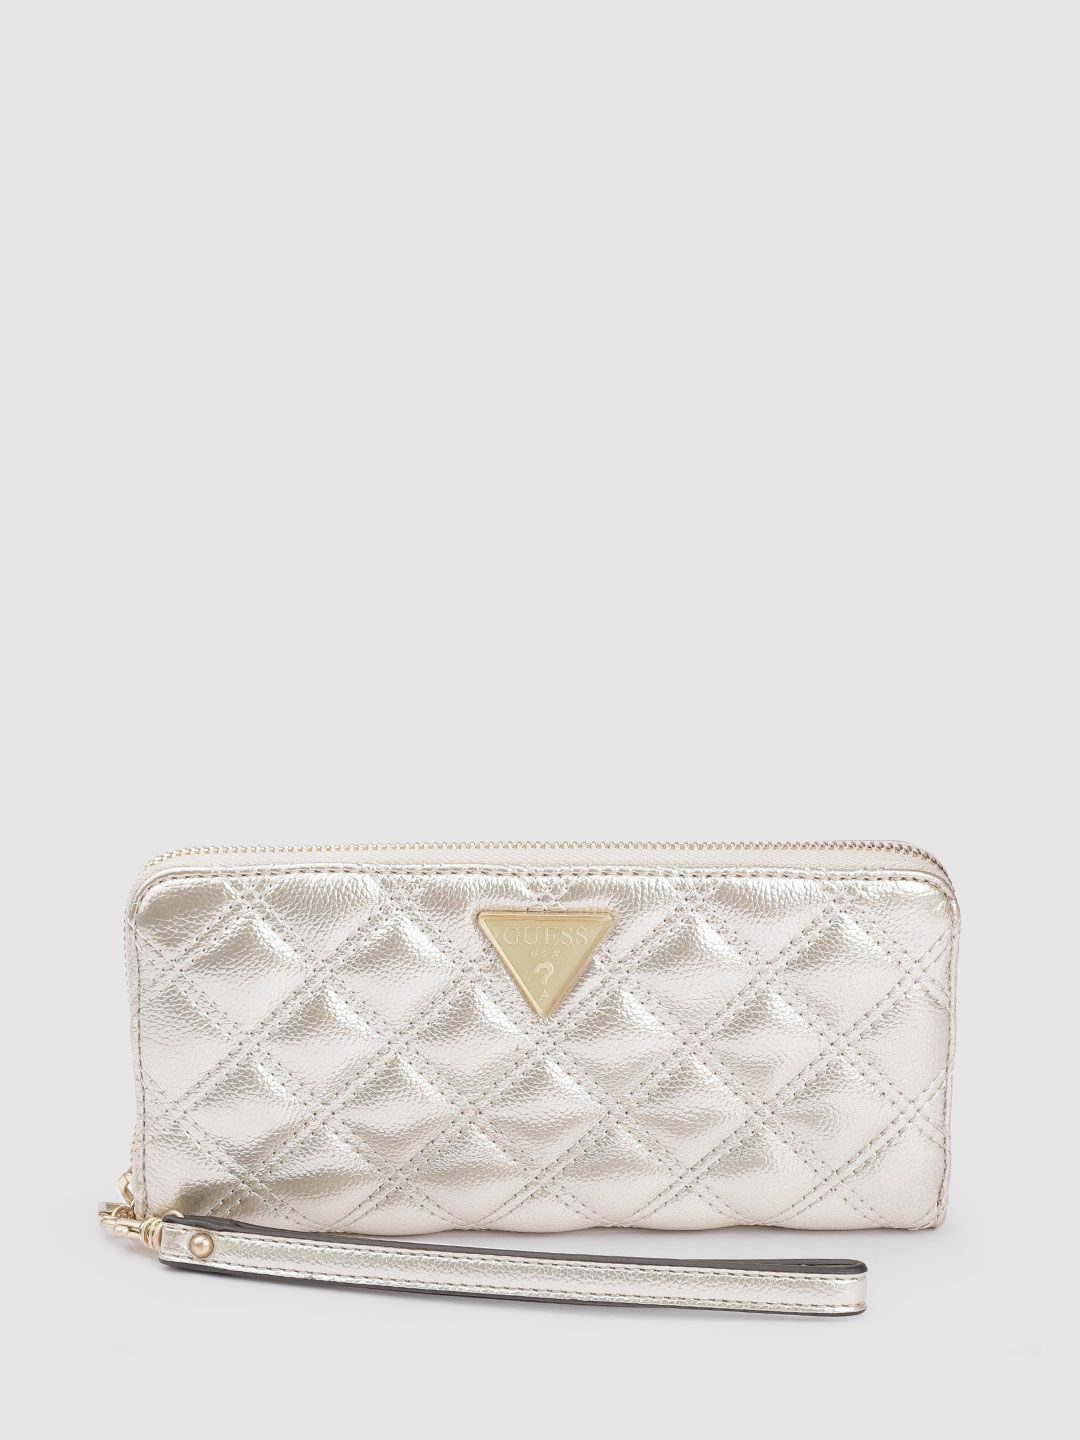 GUESS Women Gold-Toned Solid Quilted Zip Around Cessily Wallet with Wrist Loop Price in India